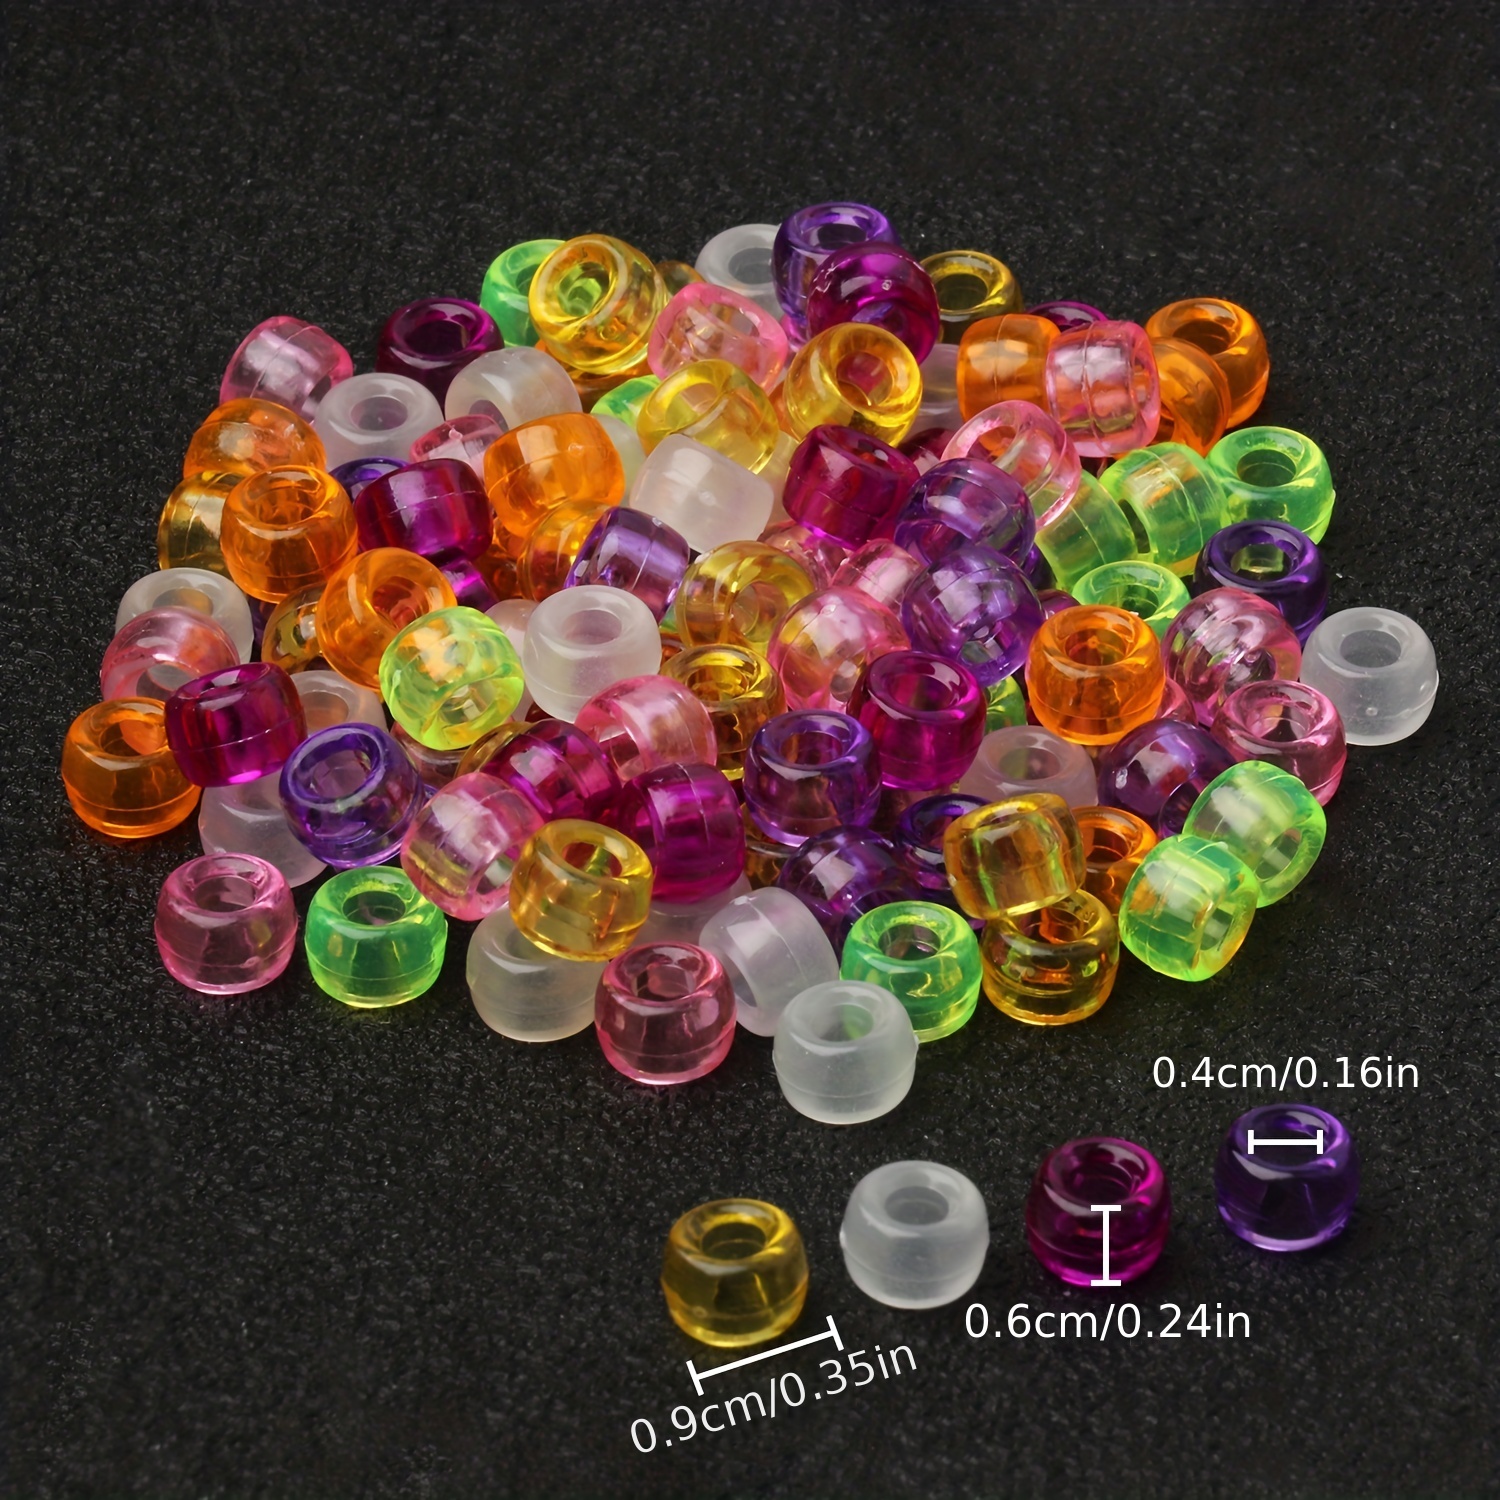 Pony Beads  Supplier of Pony Beads and Craft Supplies